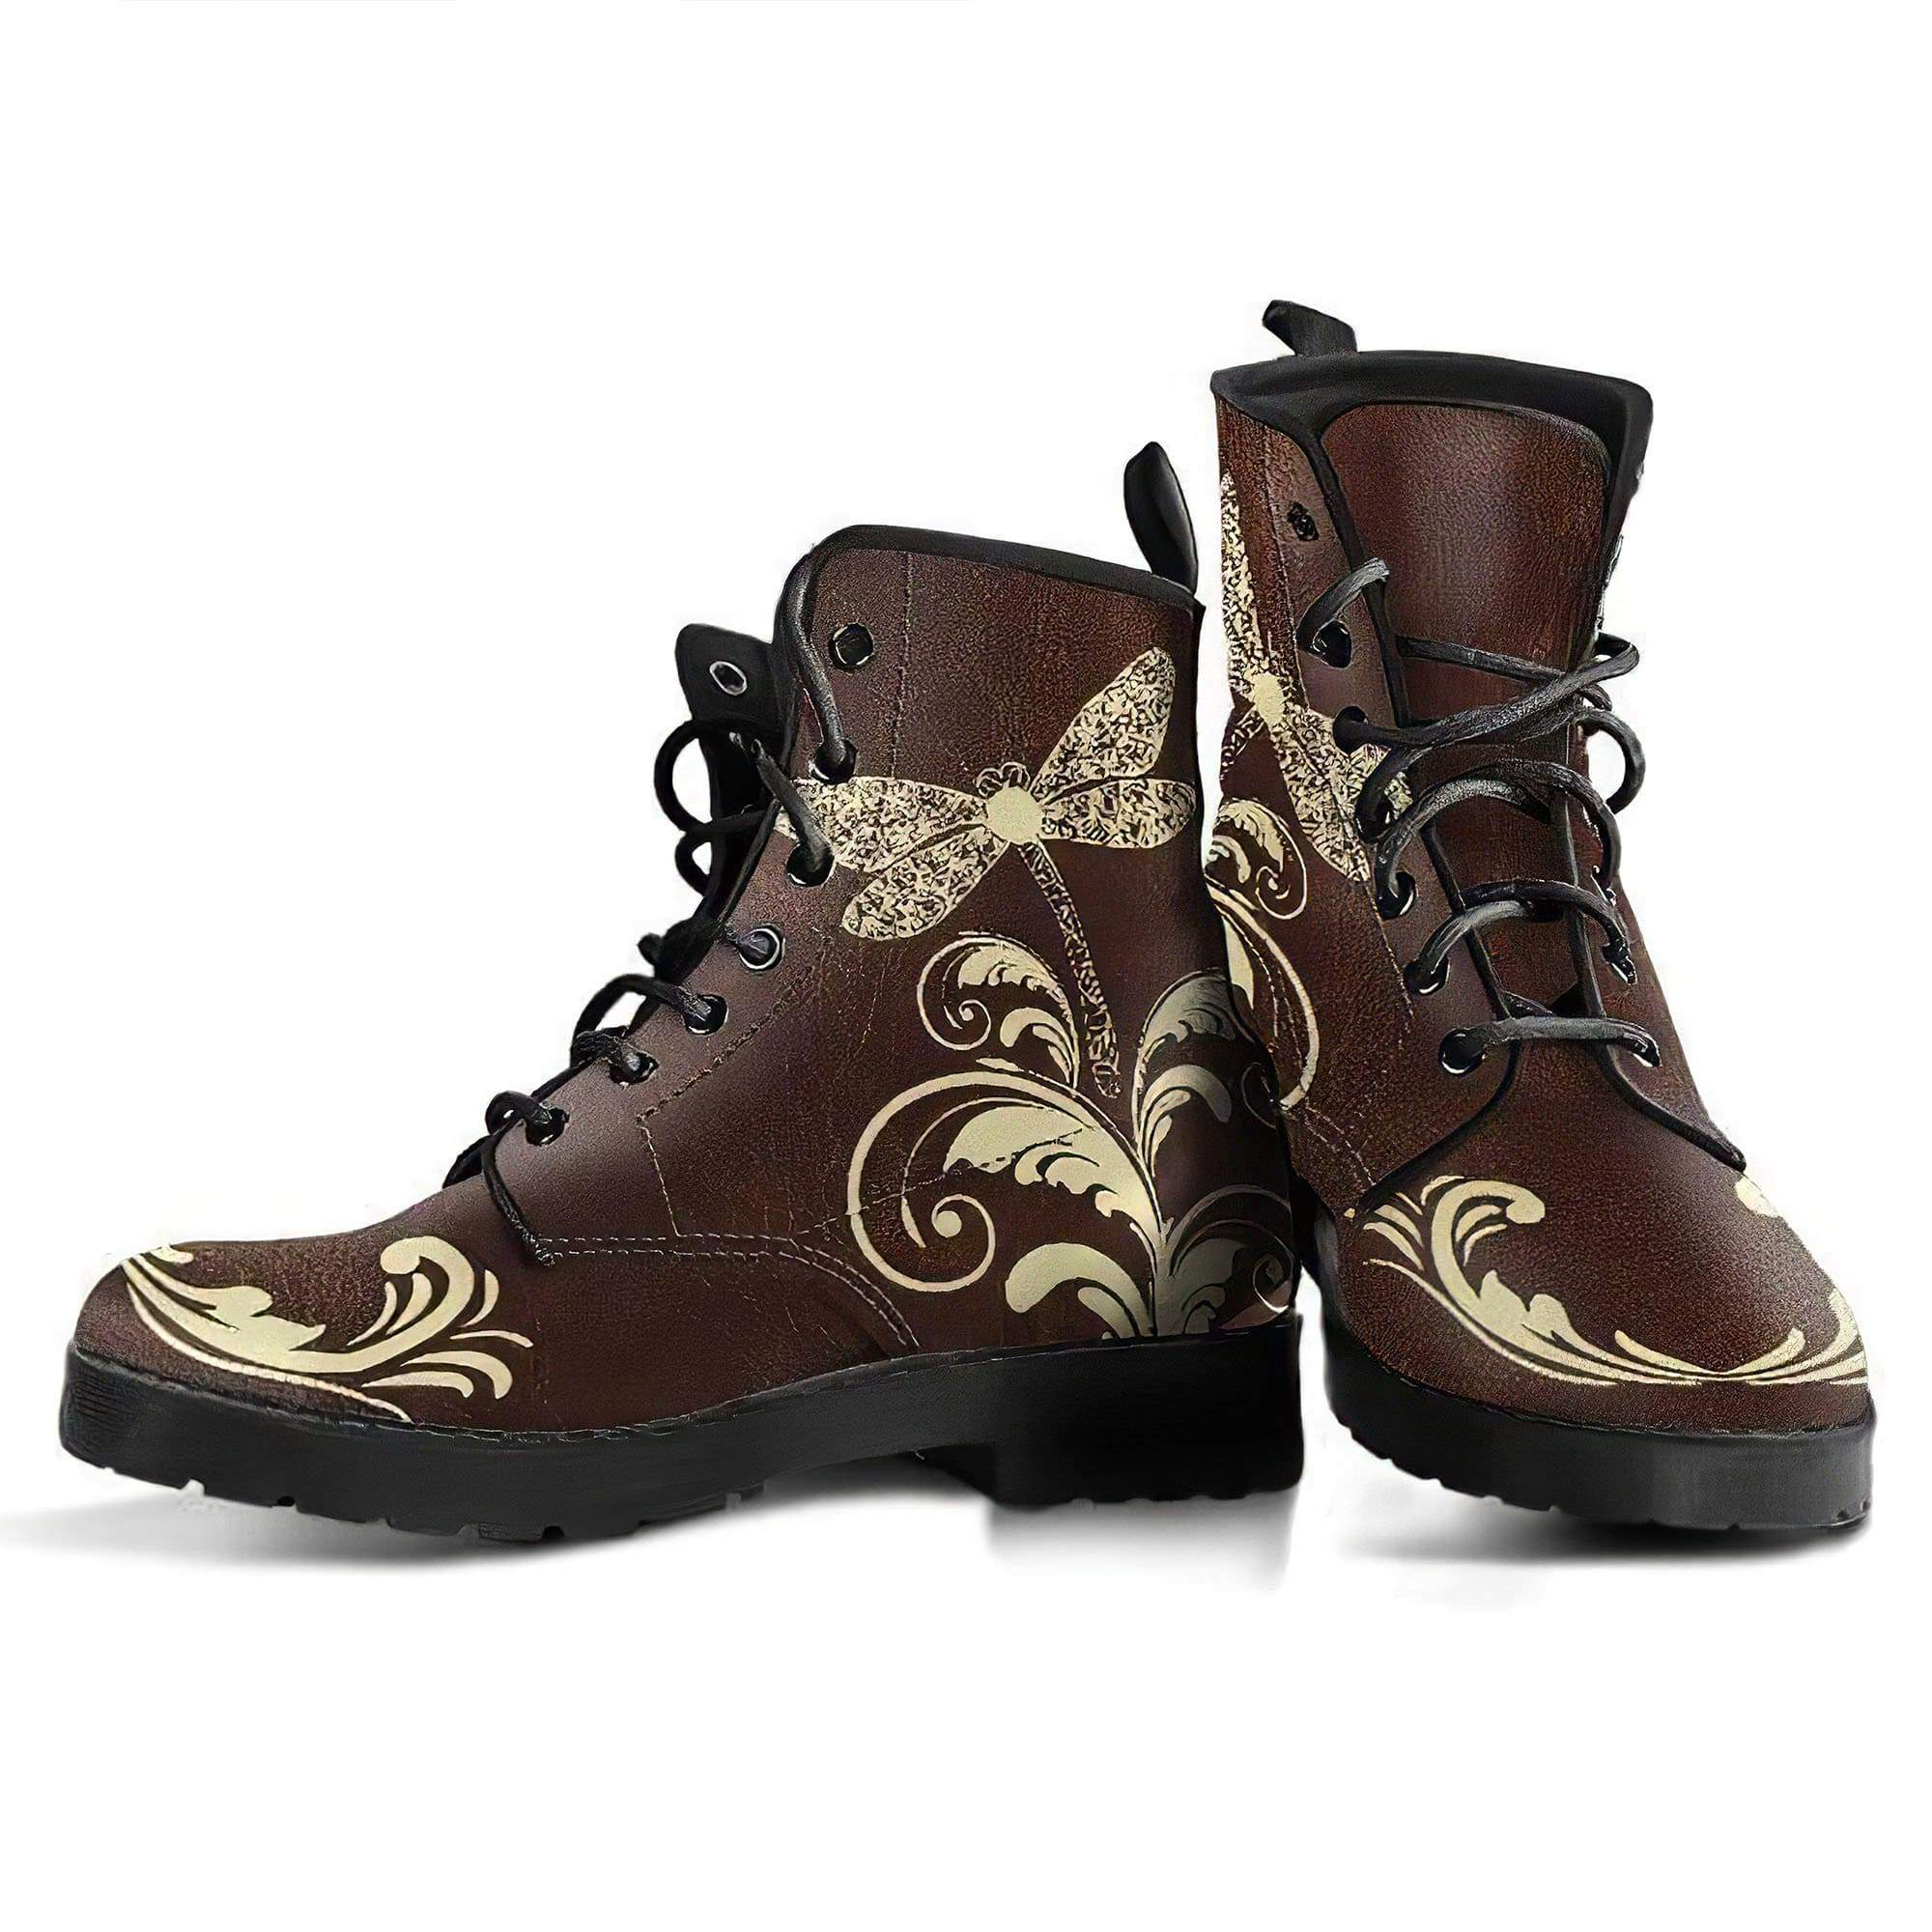 swirl-and-dragonfly-handcrafted-boots-women-s-leather-boots-12051964166205.jpg